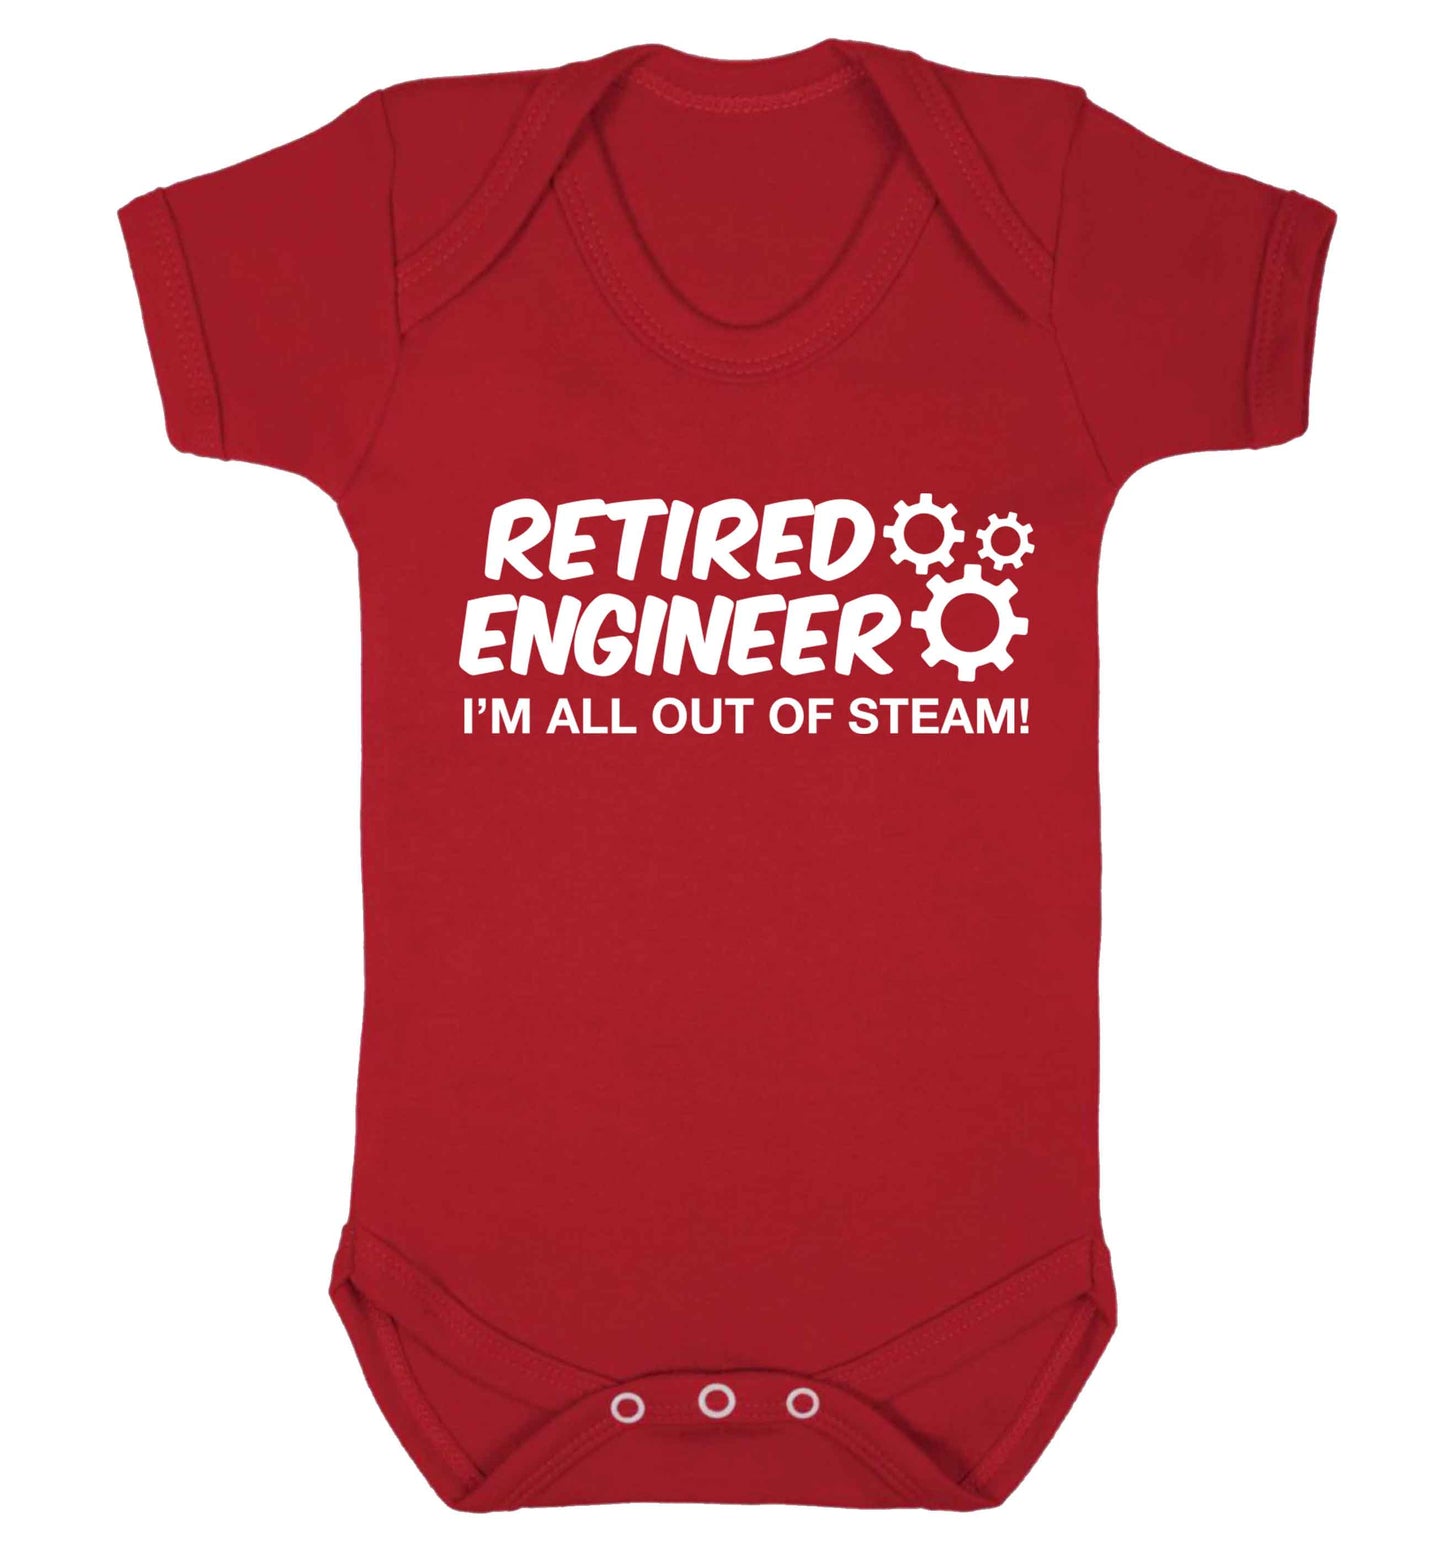 Retired engineer I'm all out of steam Baby Vest red 18-24 months